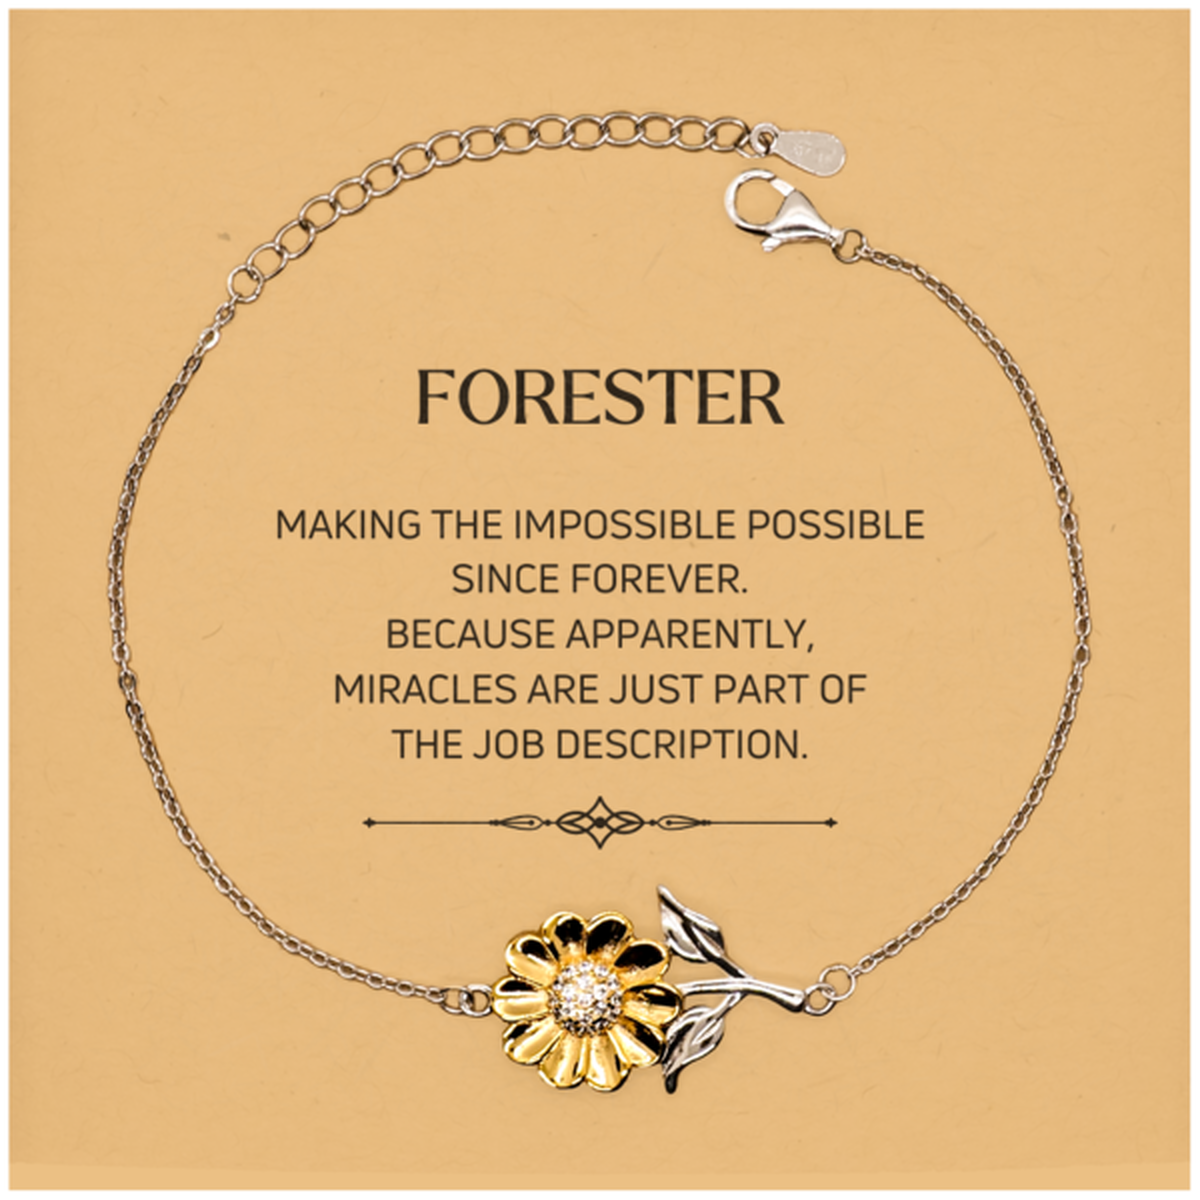 Funny Forester Gifts, Miracles are just part of the job description, Inspirational Birthday Christmas Sunflower Bracelet For Forester, Men, Women, Coworkers, Friends, Boss